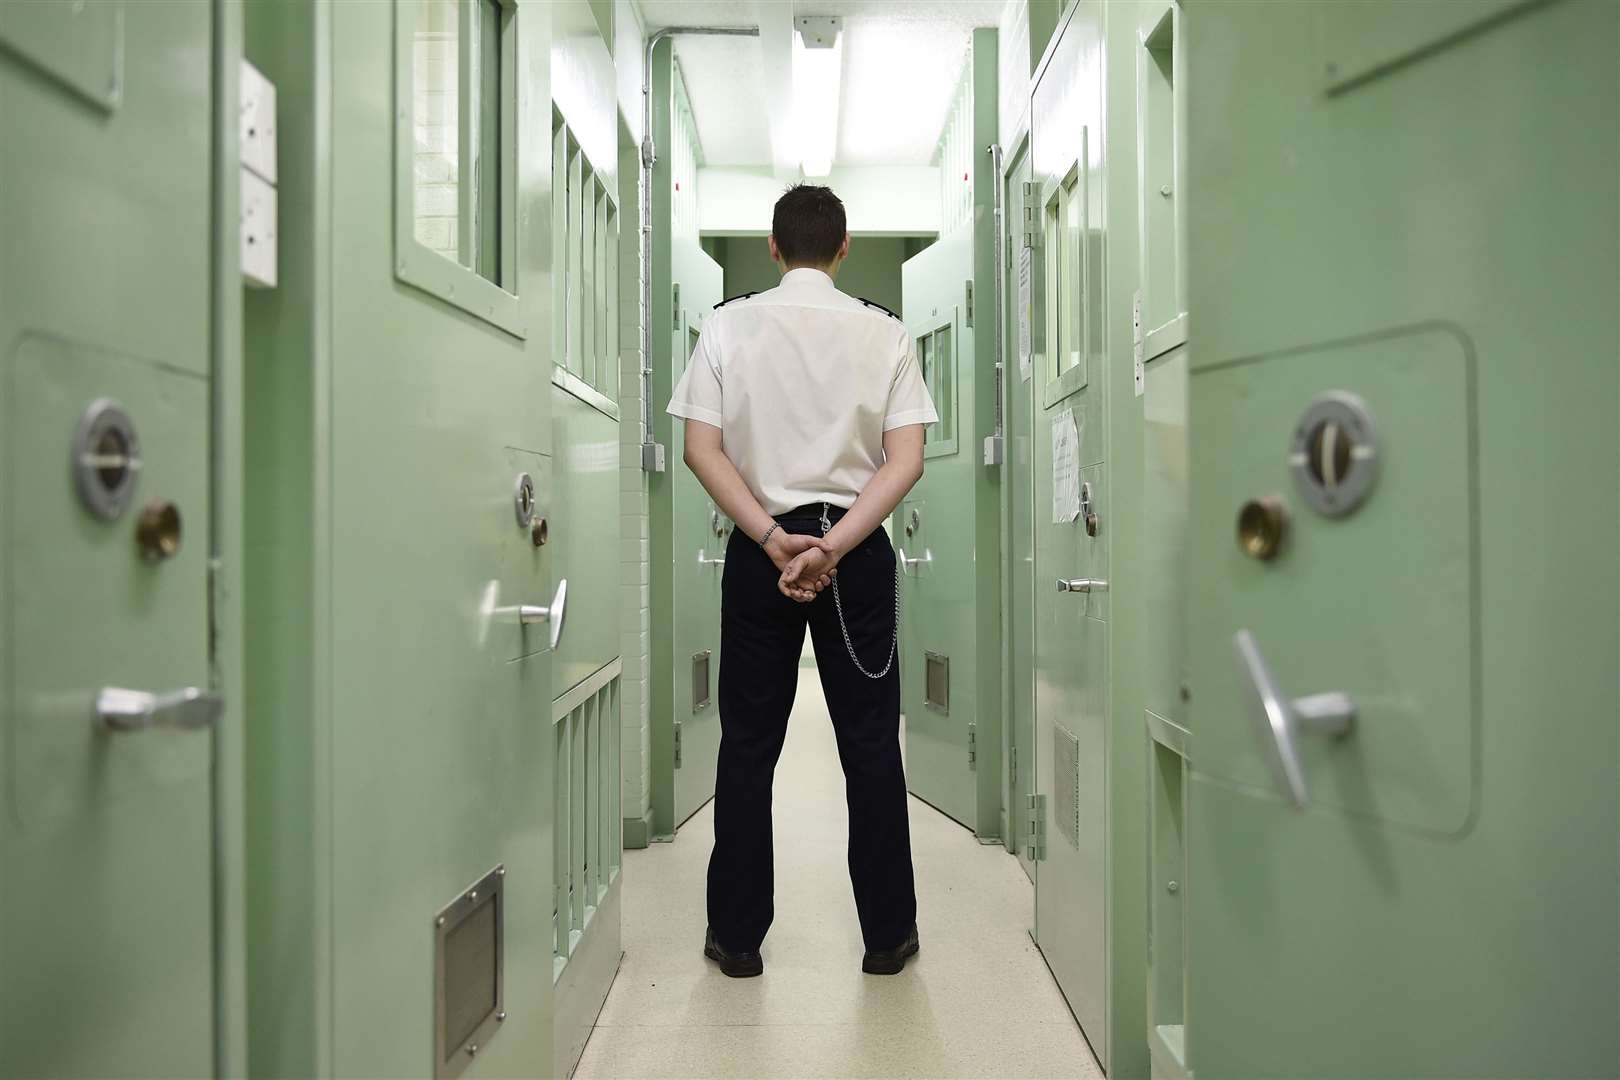 The Ministry of Justice has unveiled new plans to drive down rates of reoffending. Photo: iStock.